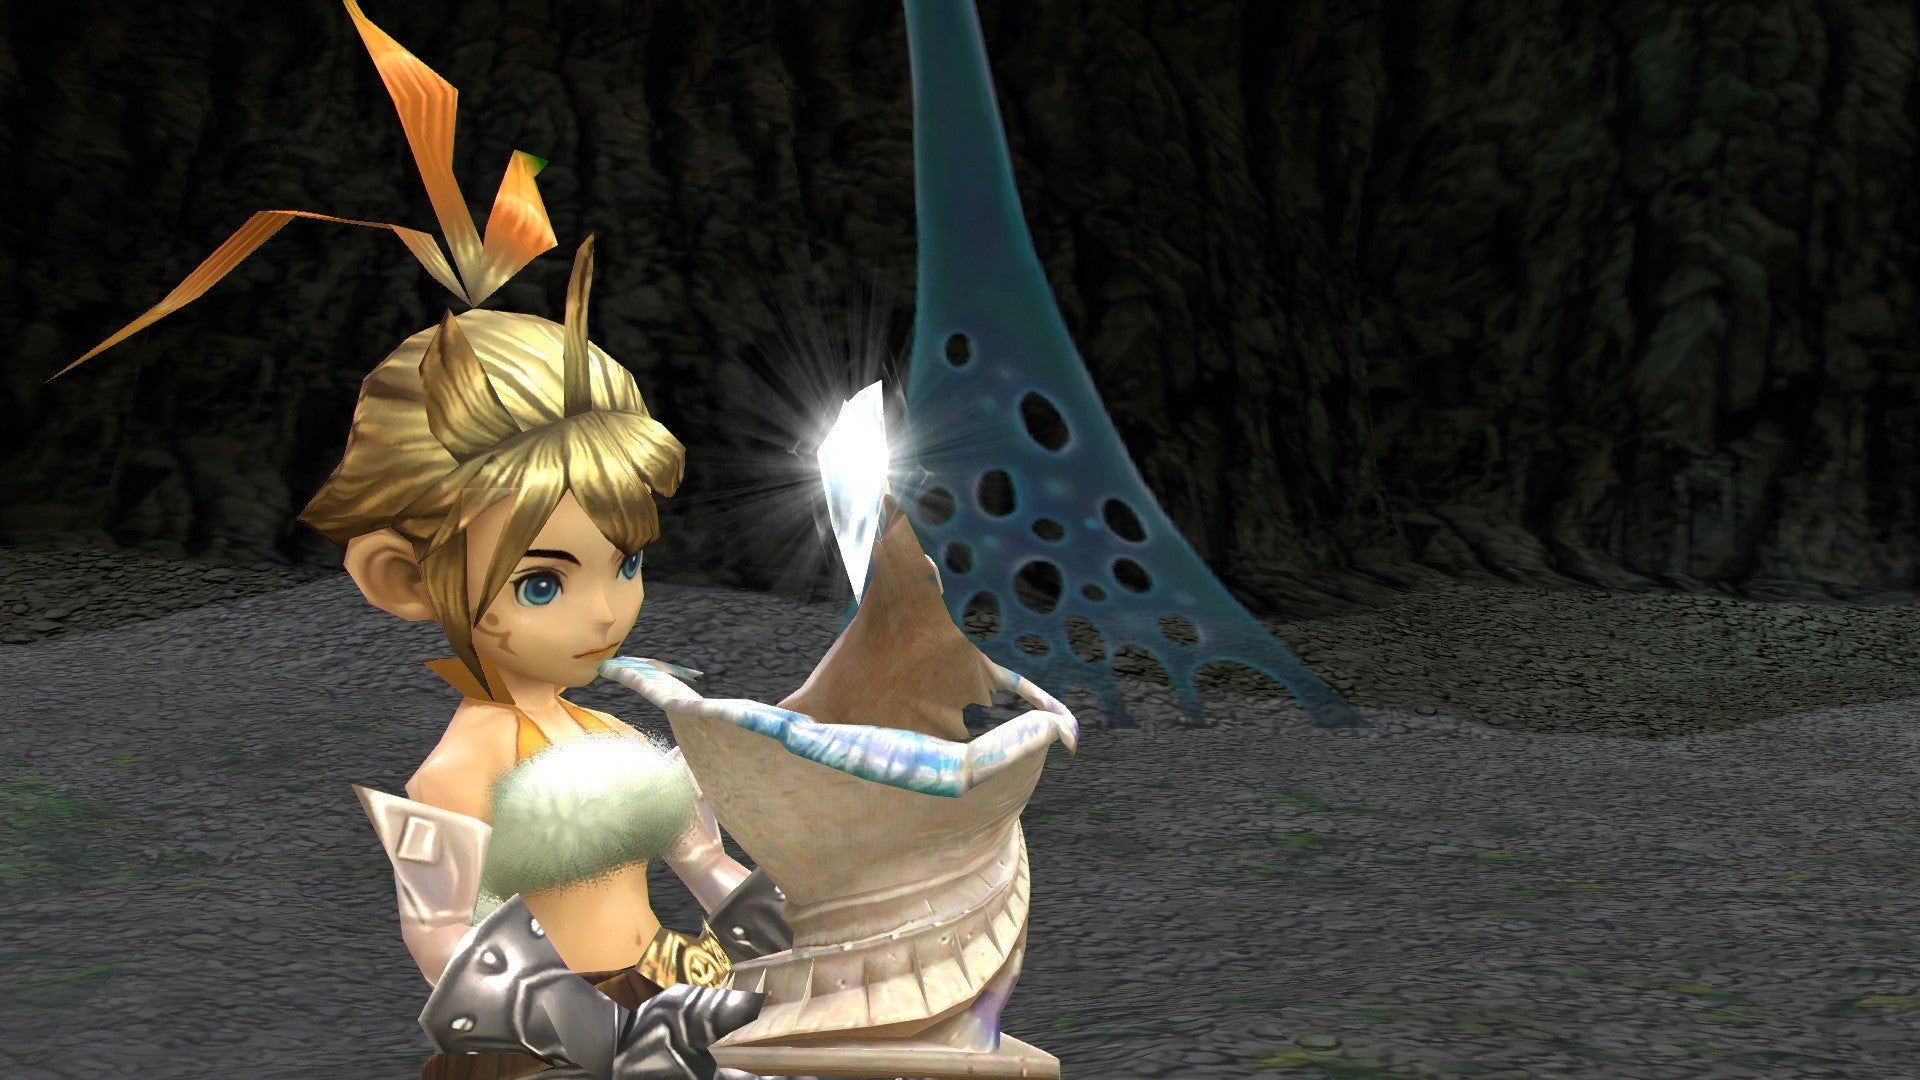 Final Fantasy Crystal Chronicles Remastered Edition Release Date Announced